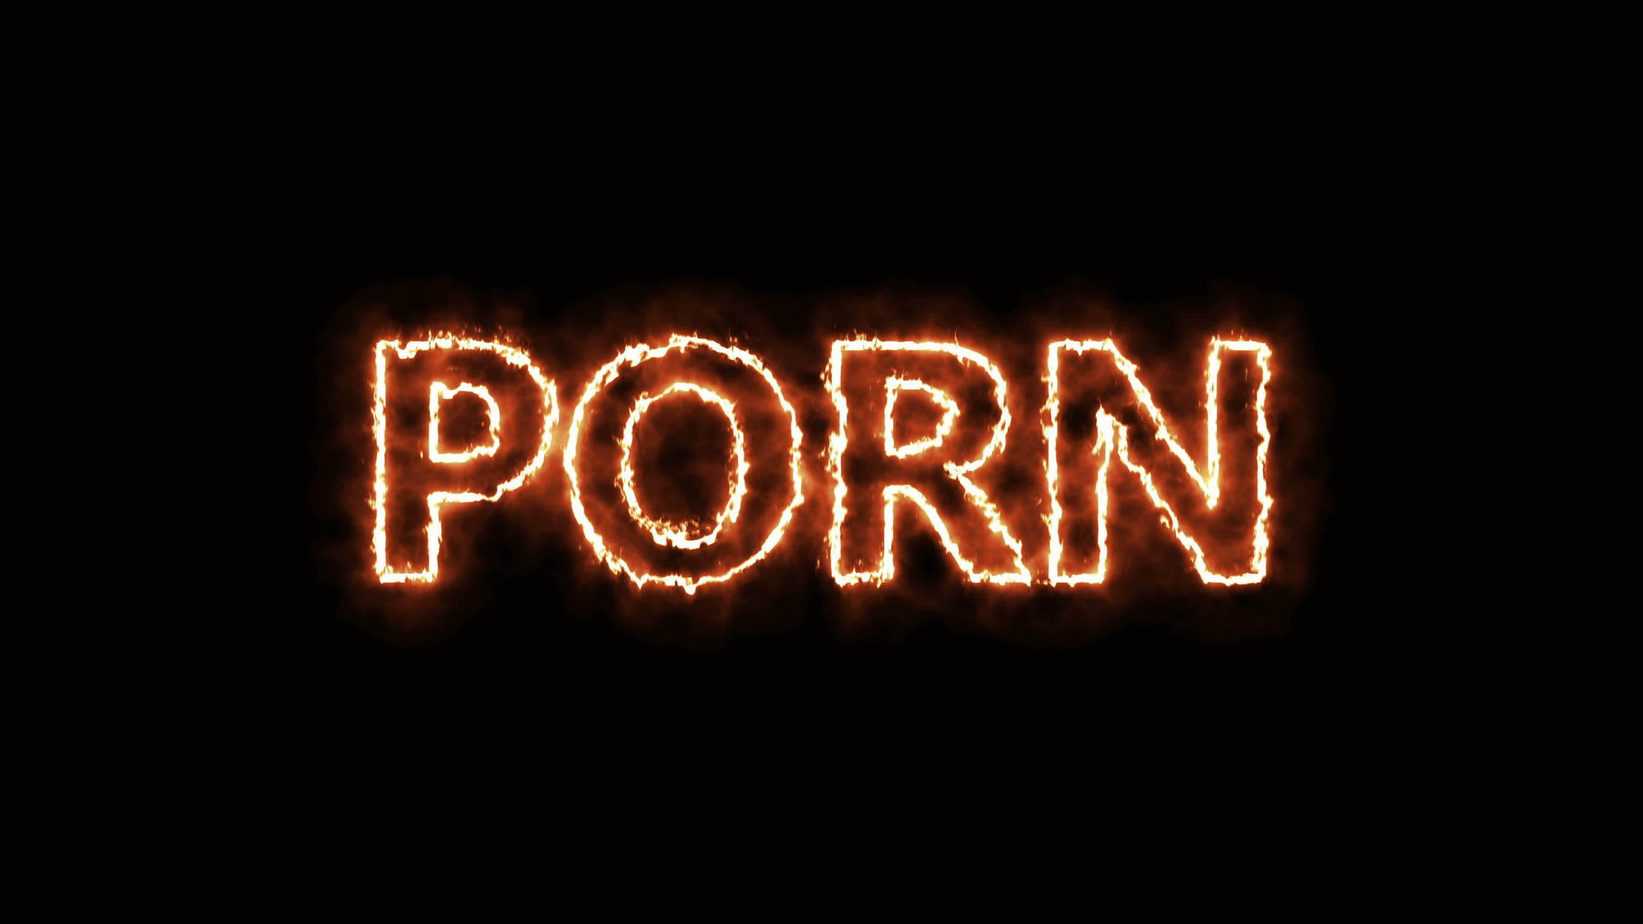 Tired of being a porn addict? Here’s how to put out the fire raging within